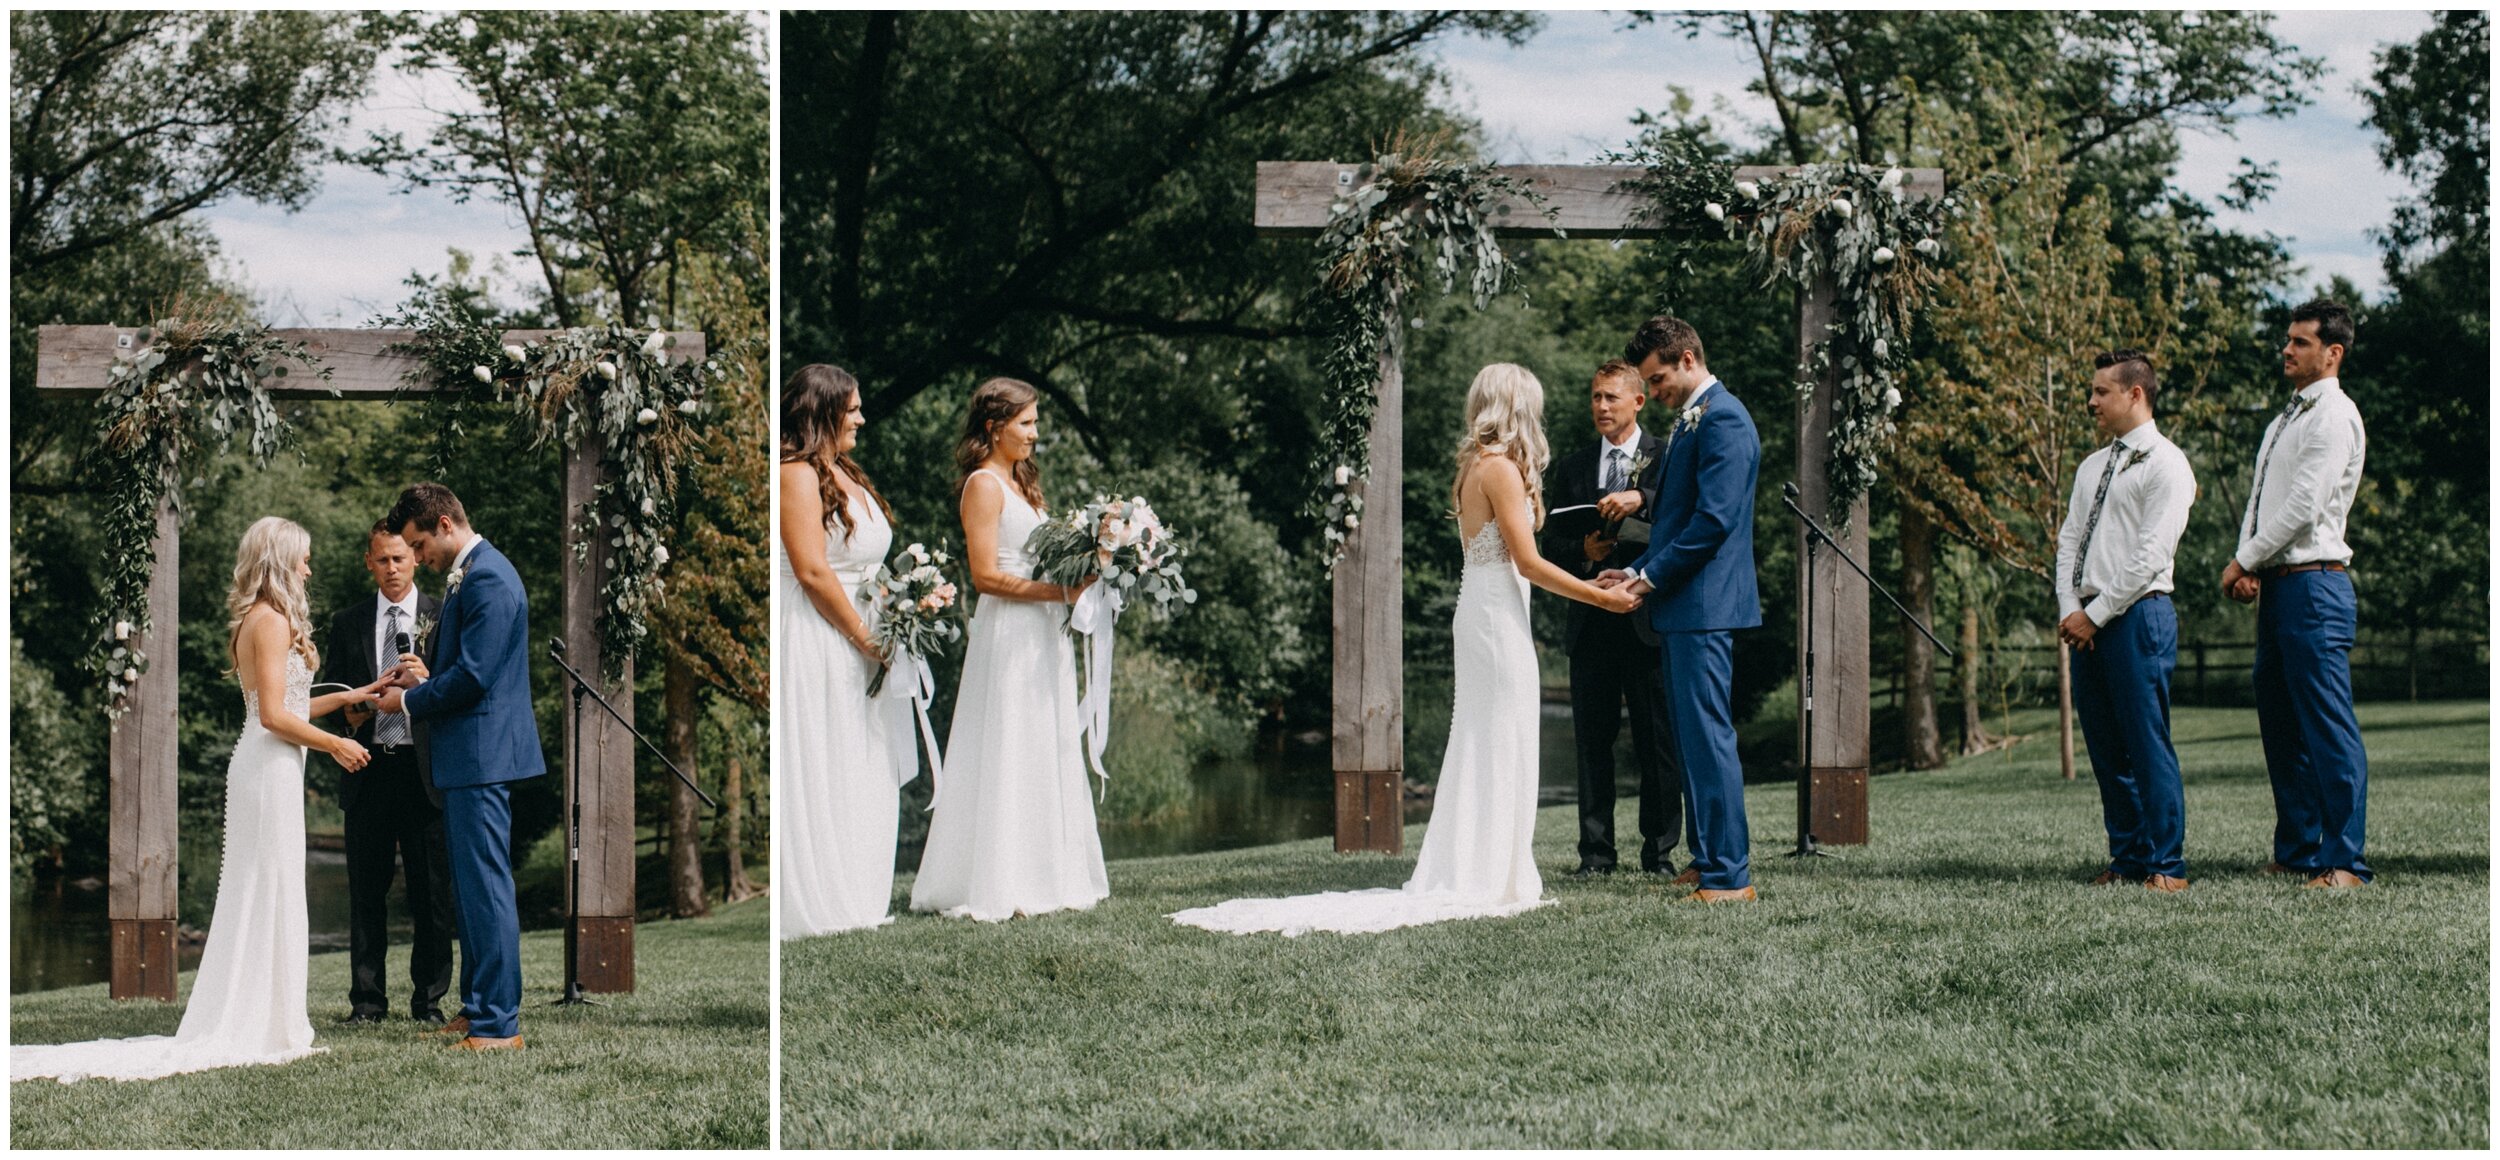 Bride and groom exchanging wedding rings during ceremony at Minnesota barn wedding